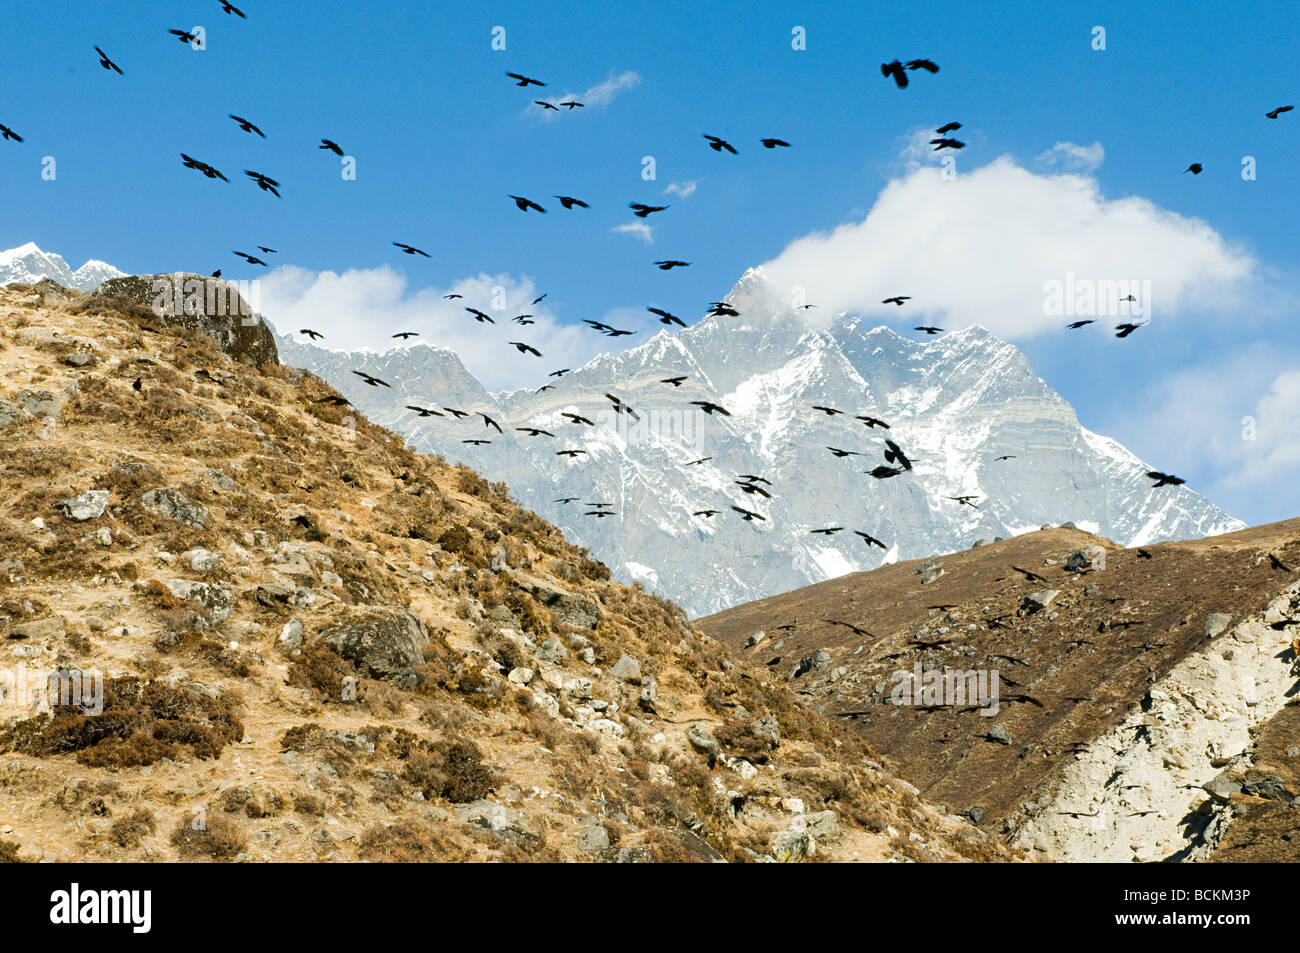 Crows over himalayas Stock Photo